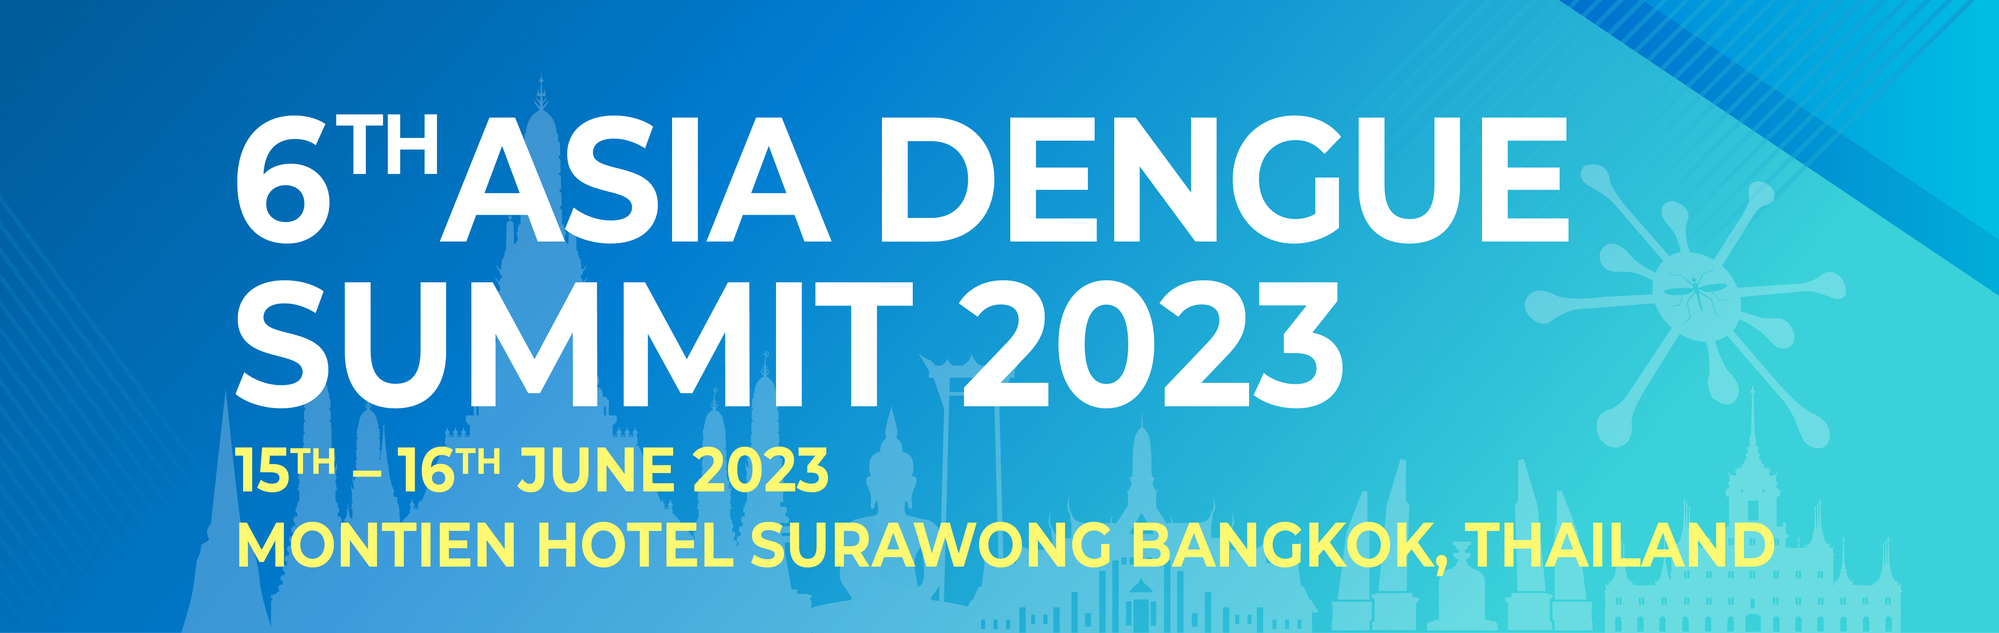 Title banner, that reads '6th Asia Dengue Summit 2023'